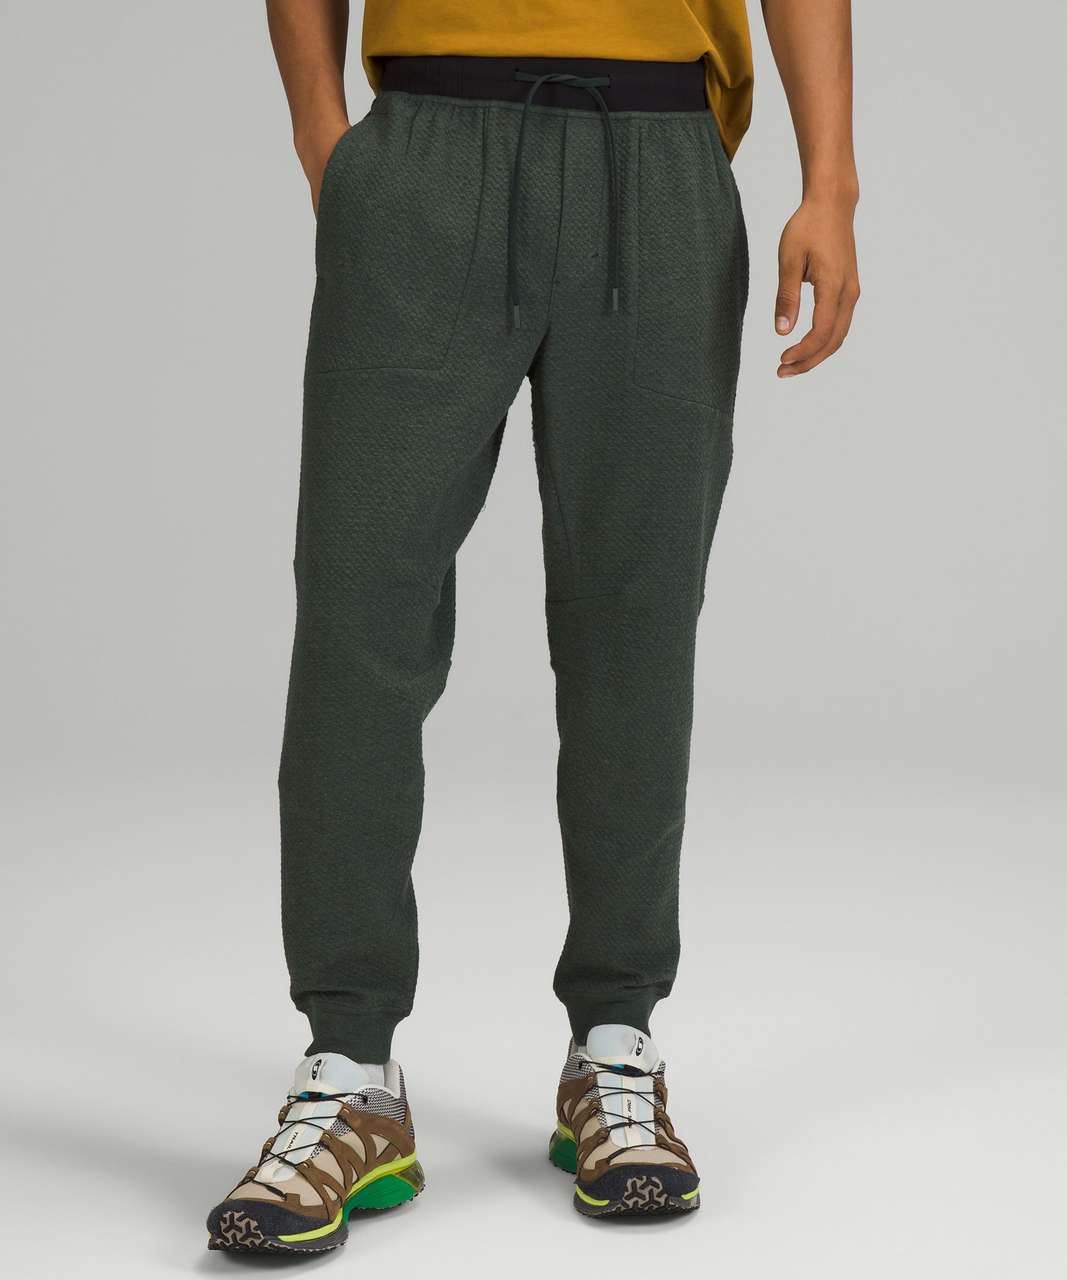 Lululemon Surge Joggers (Dark Forest Green) for Sale in Greenville